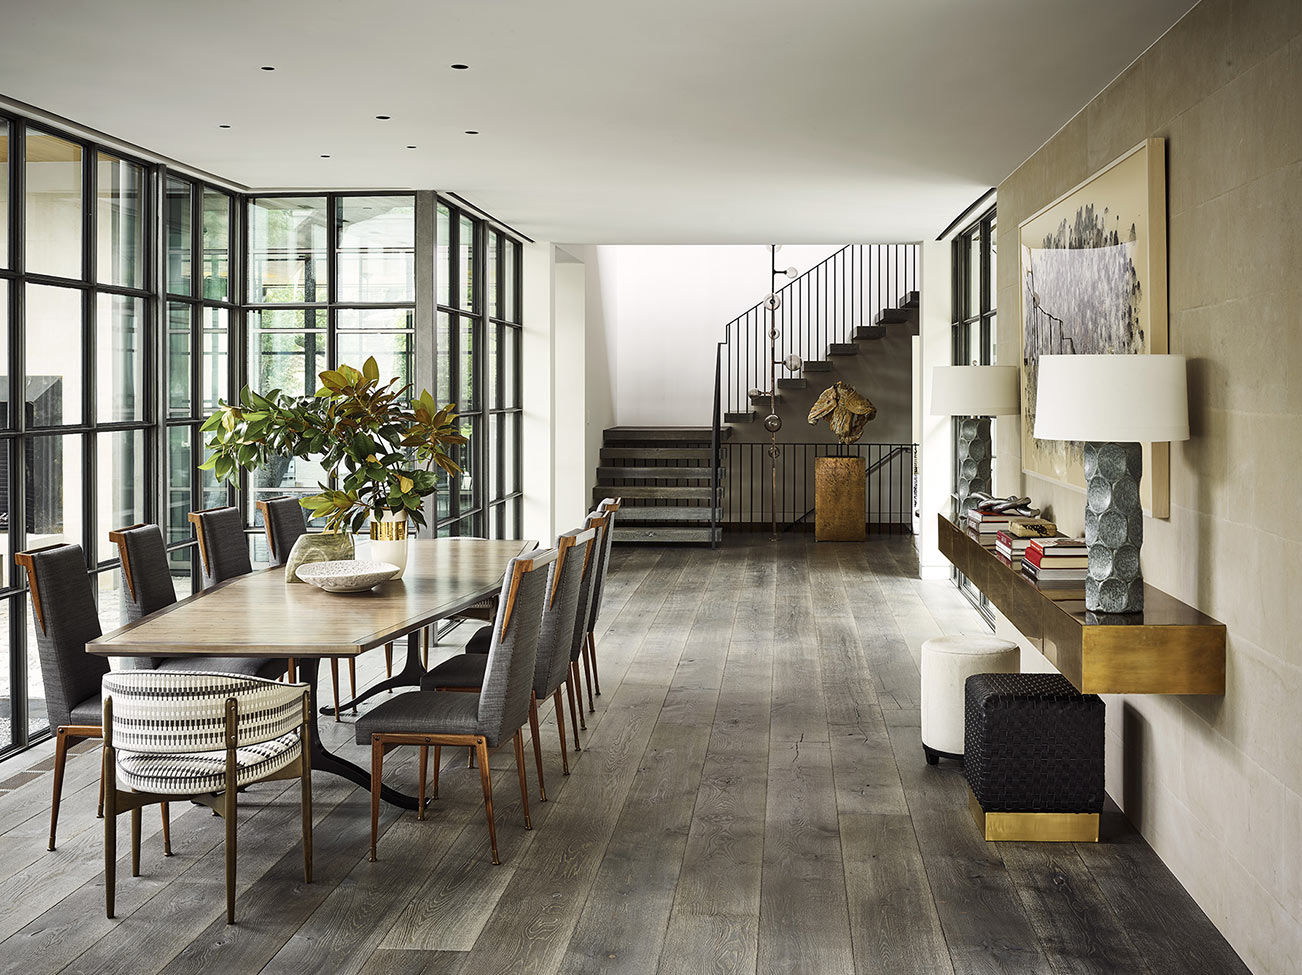 Dining room with grey wood floors, floor-to-ceiling metal-paned windows, and elegant staircase.